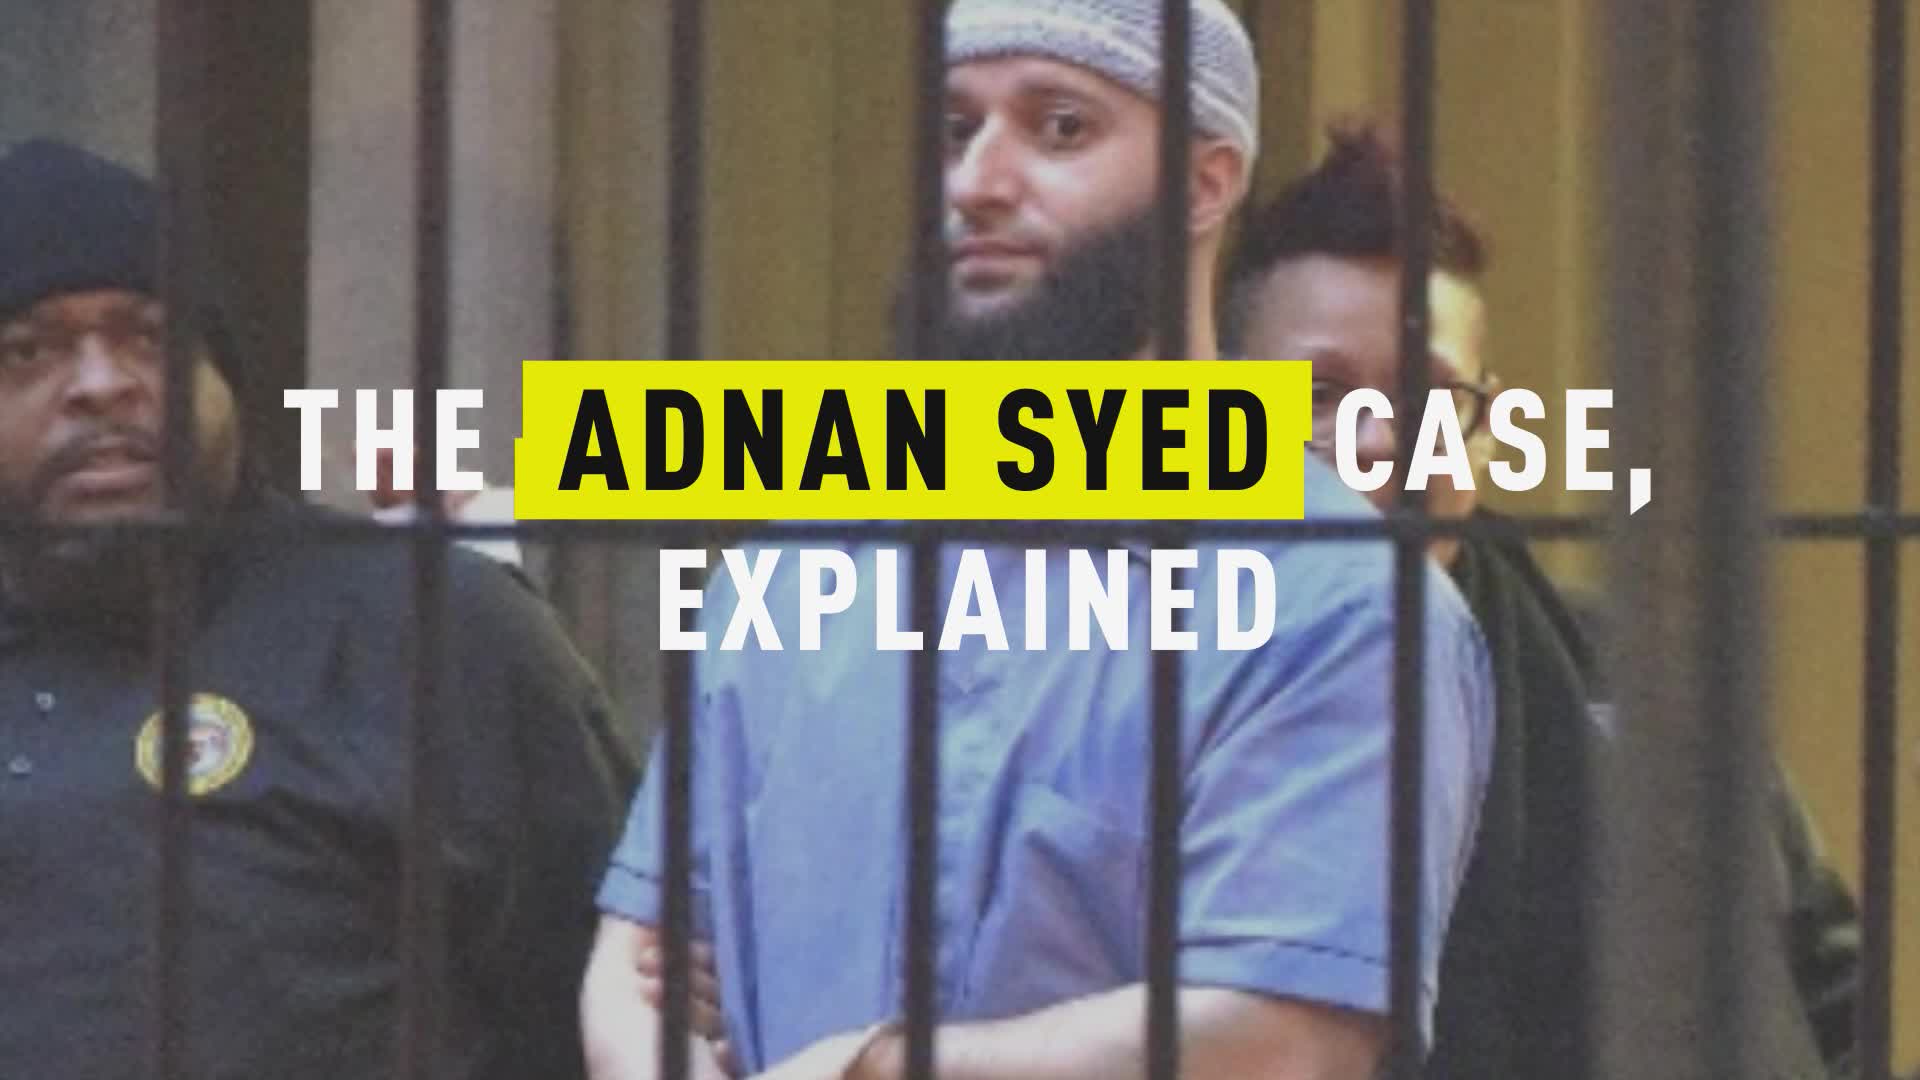 Watch The Adnan Syed Case Explained Famous Cases Explained Season 1 Video